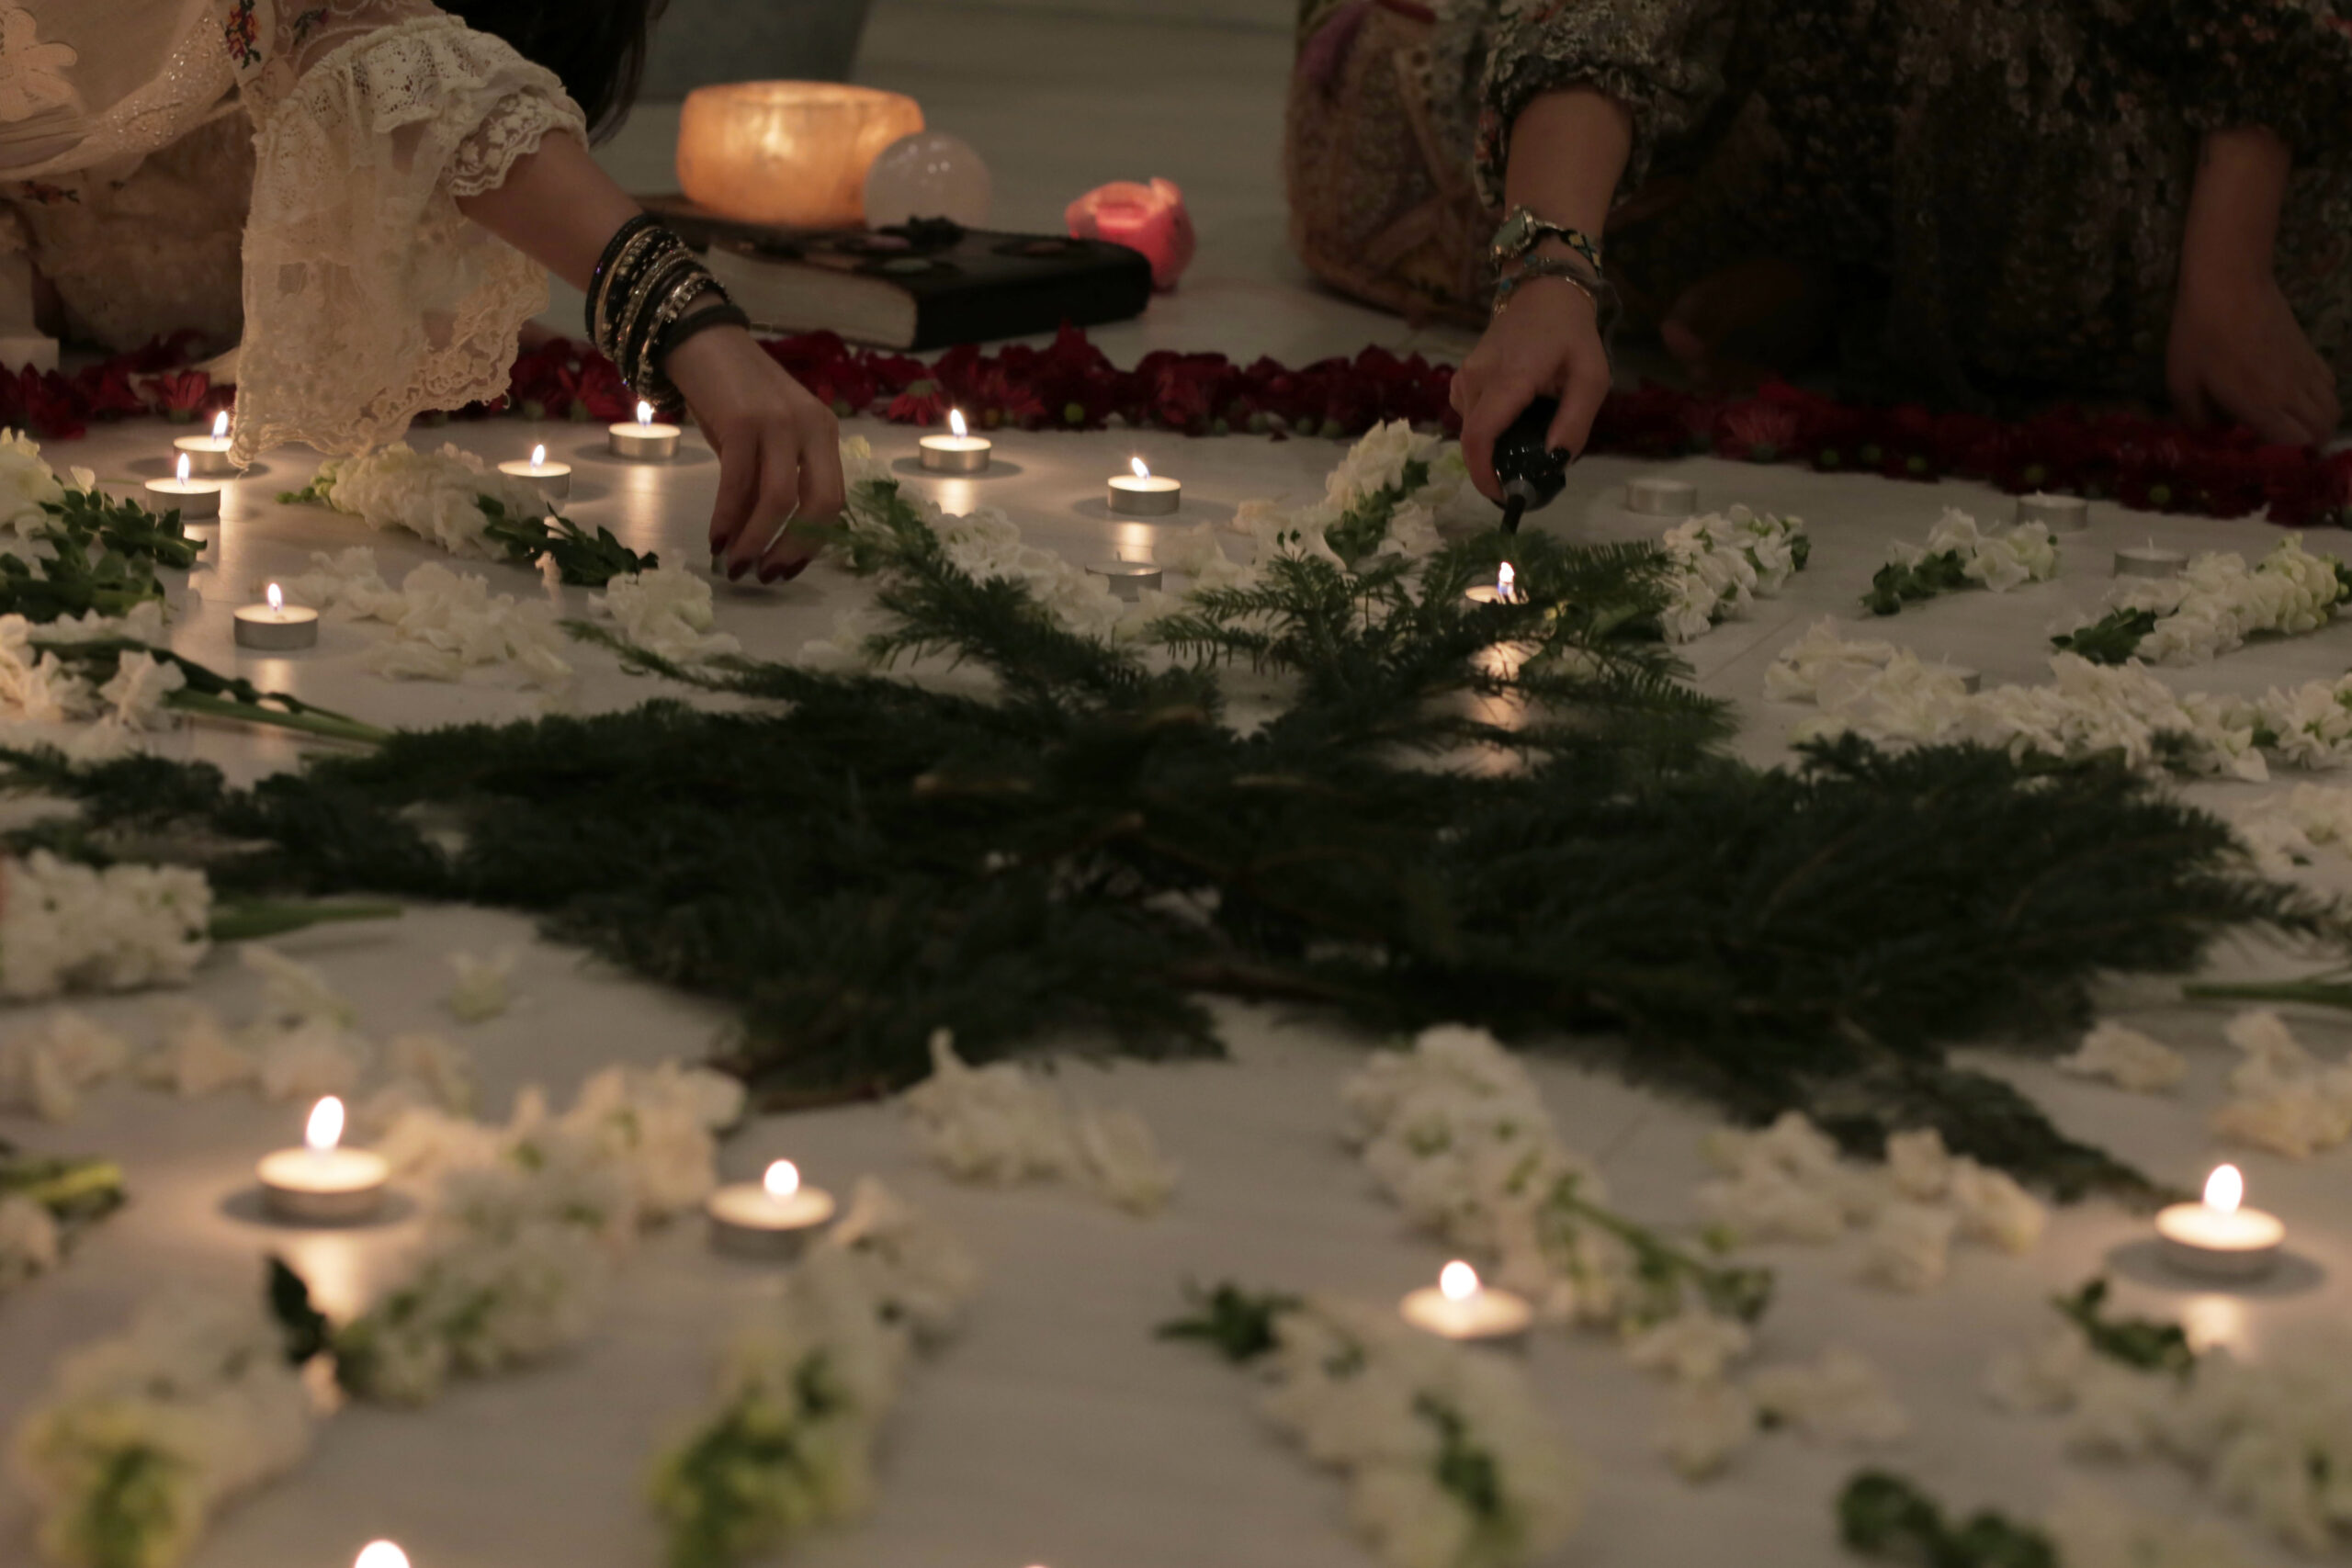 lit candles in a meditation gathering